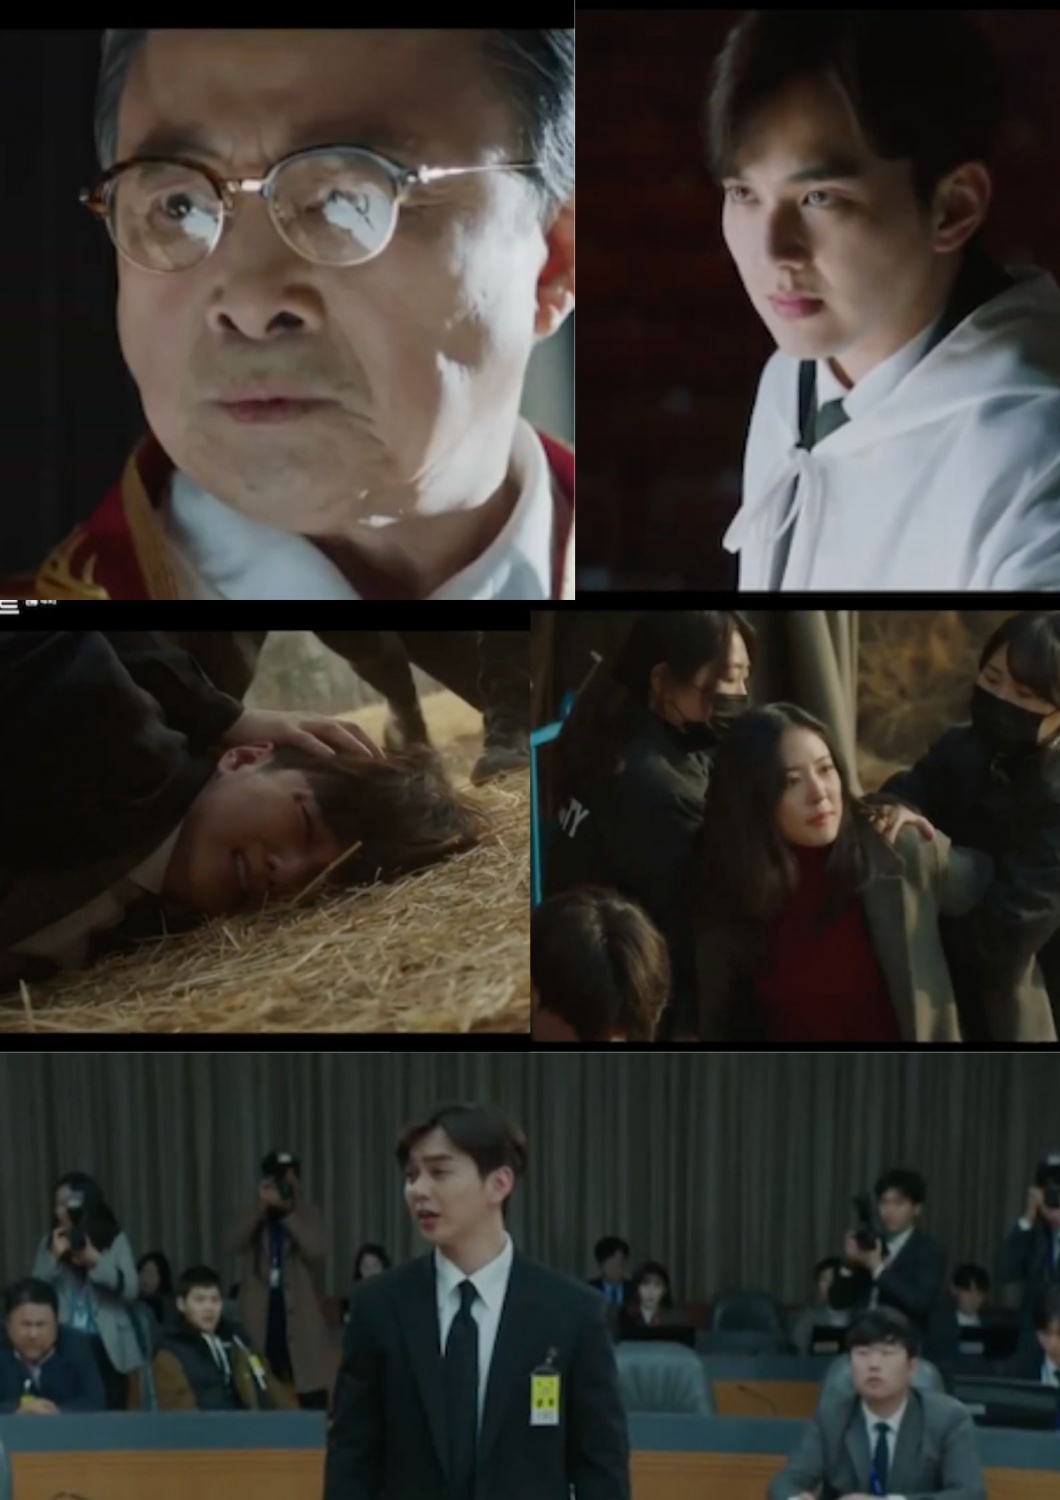 Episode 4: Yoo Seung Ho, Lee Se Young in Search for Clues in "Memorist